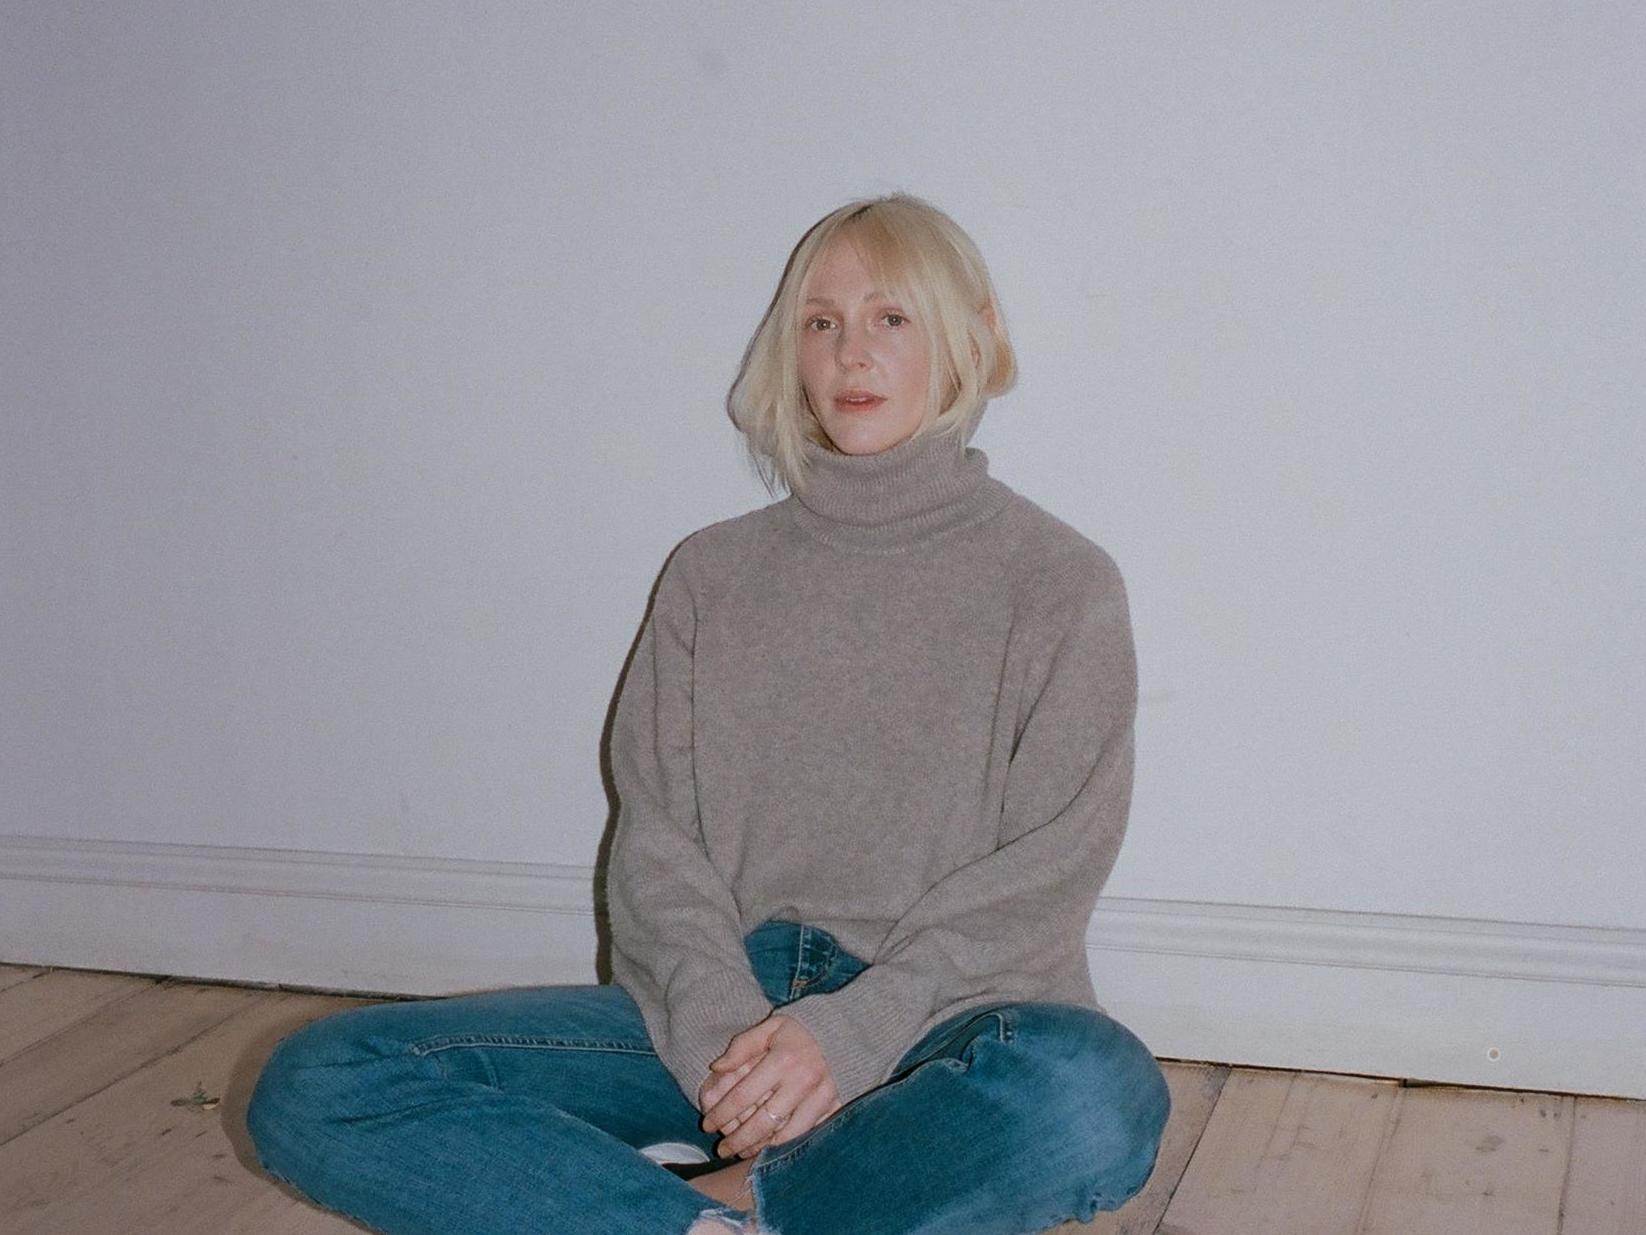 Laura Marling to The Independent in 2020: ‘I won’t be reduced to a cultural trope’